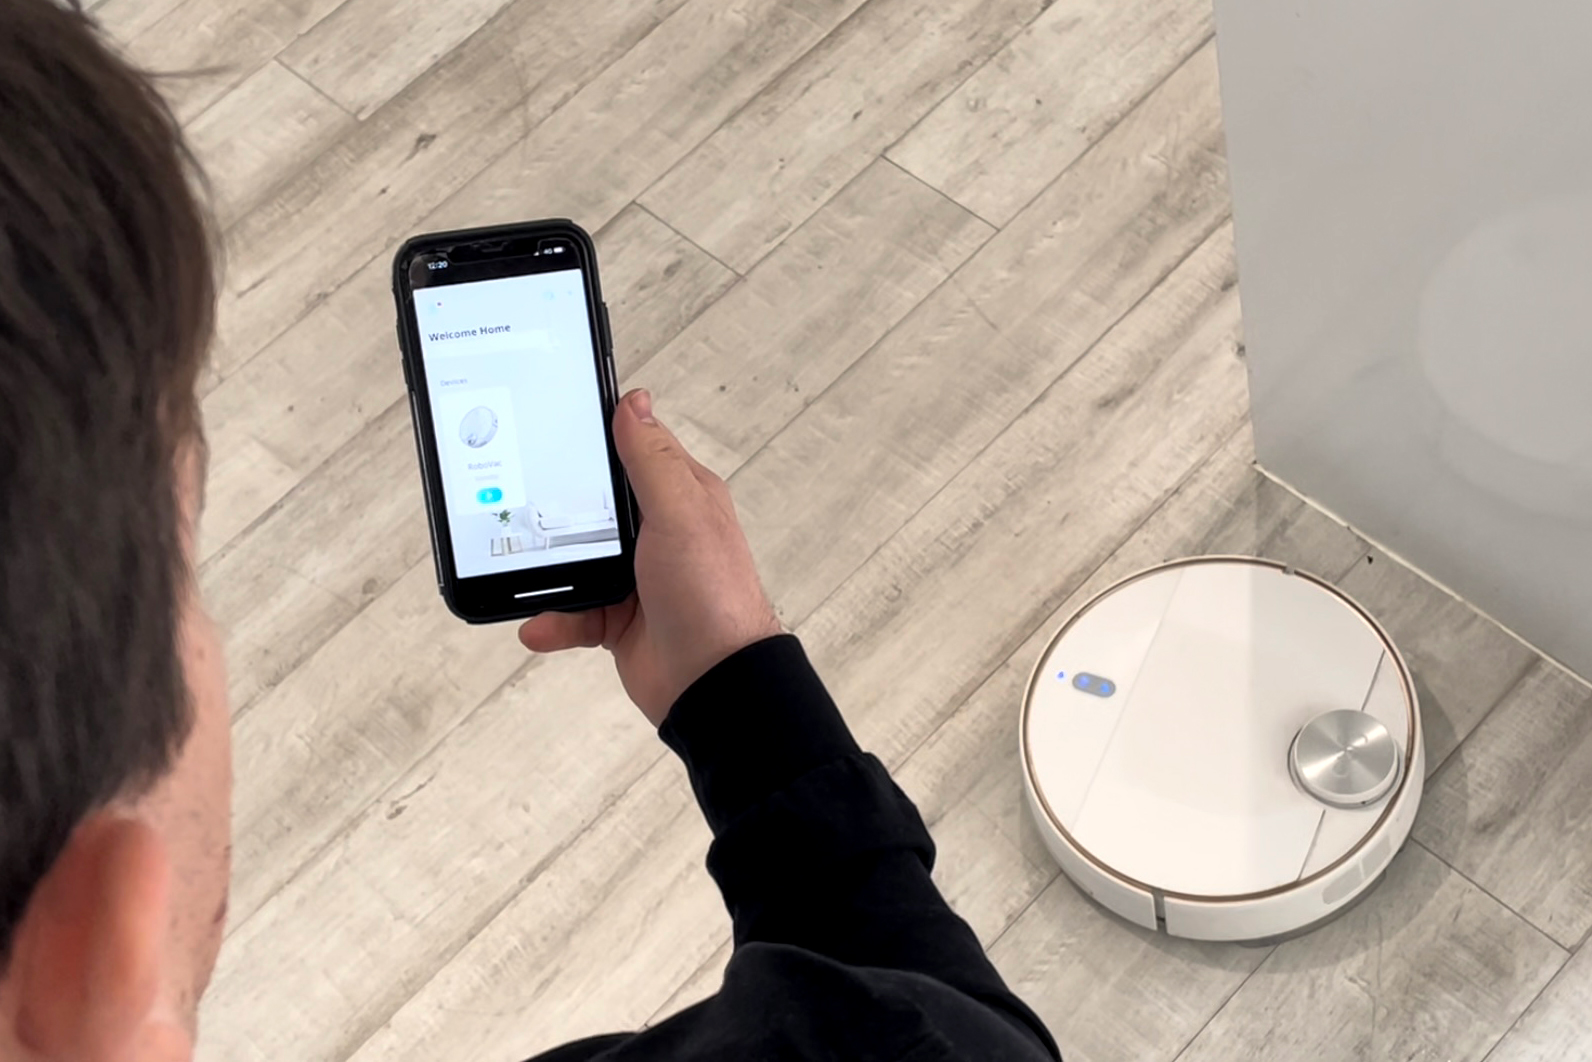 A man uses the Robovax app on his mobile phone. The Robovax vacuum is on the floor in front of him.